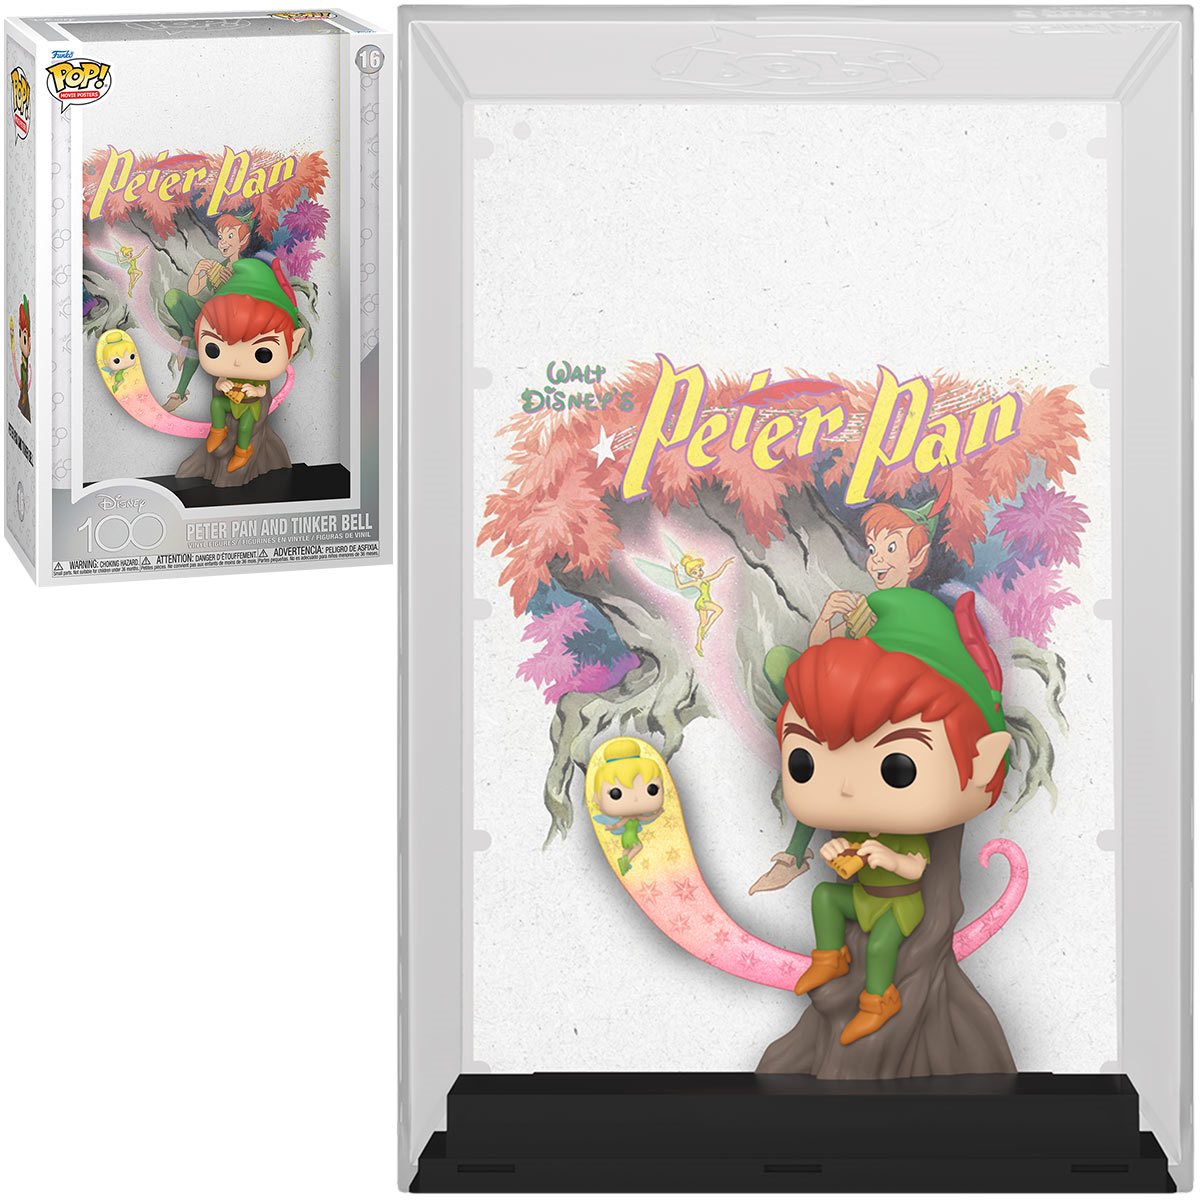 Funko Pop! Disney 100 Peter Pan Movie Poster with Case #16